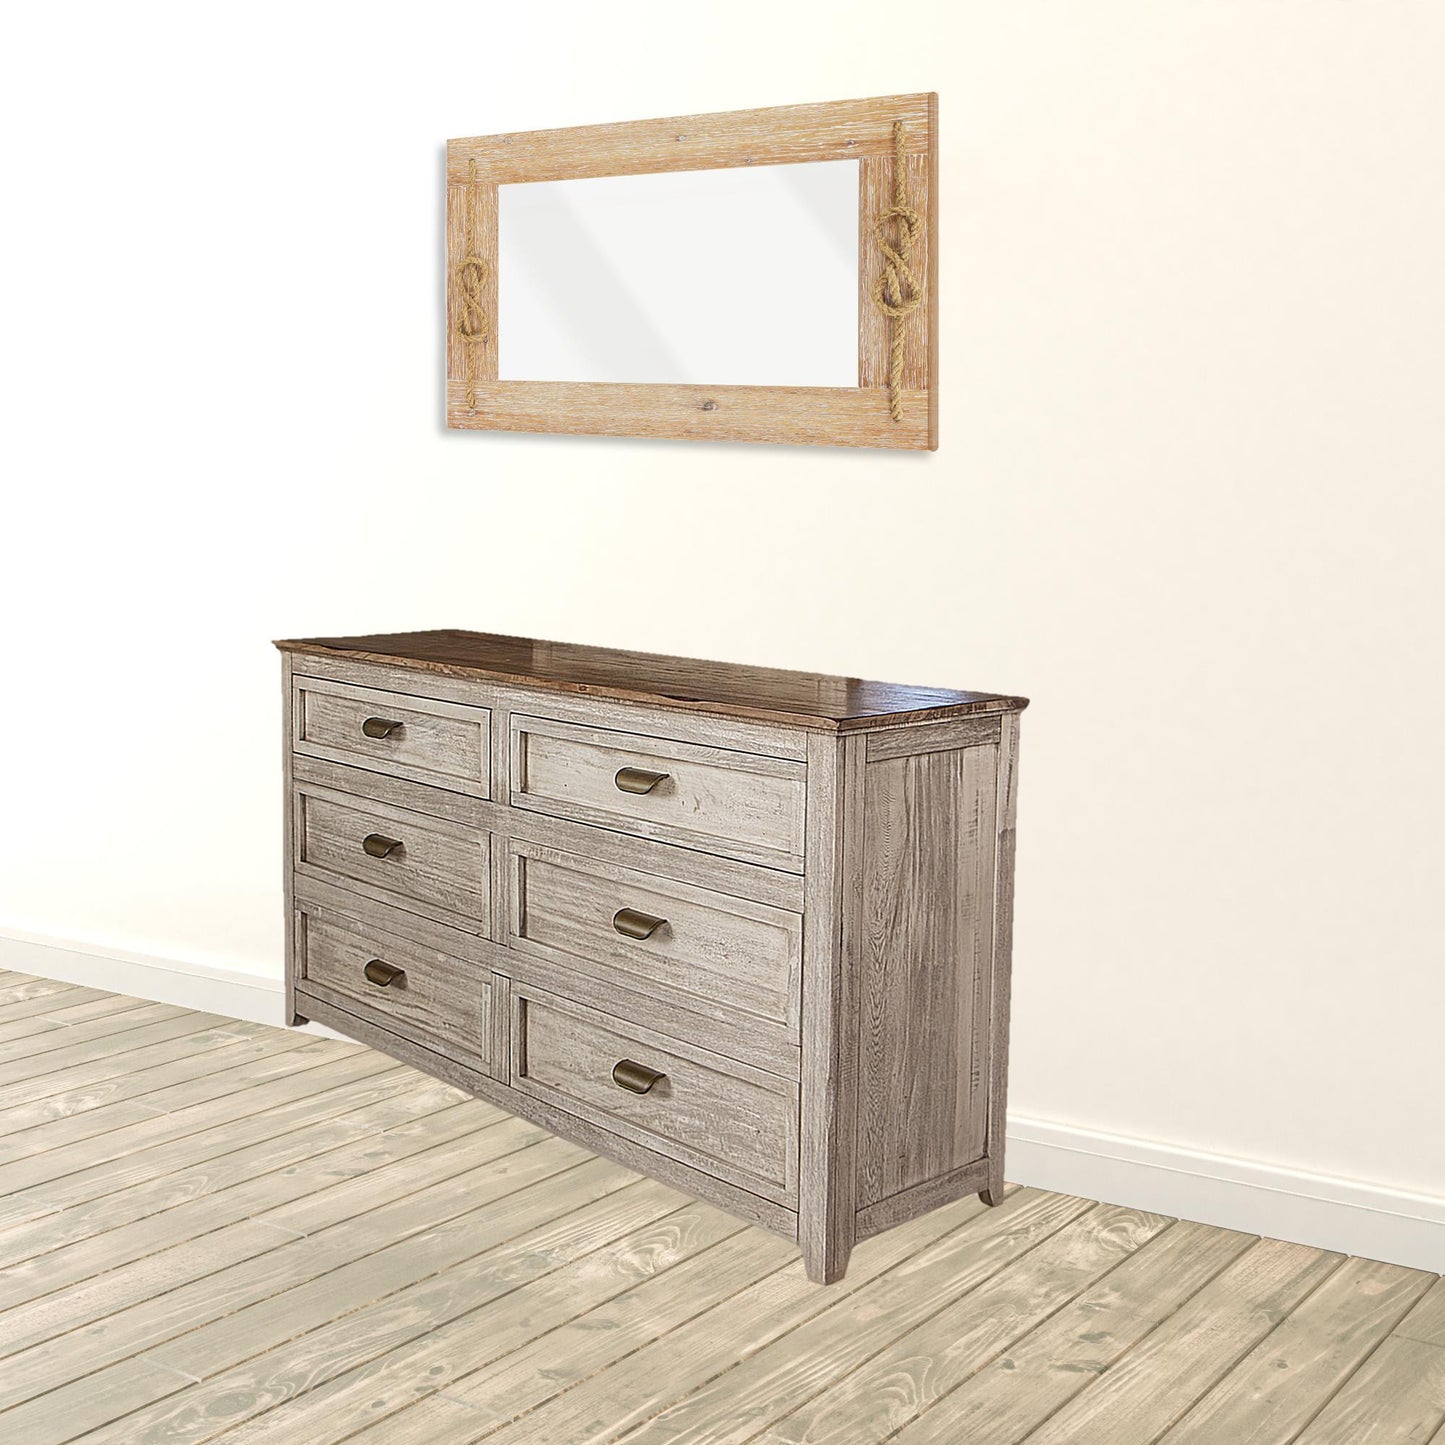 70" Cream Solid Wood Six Drawer Double Dresser